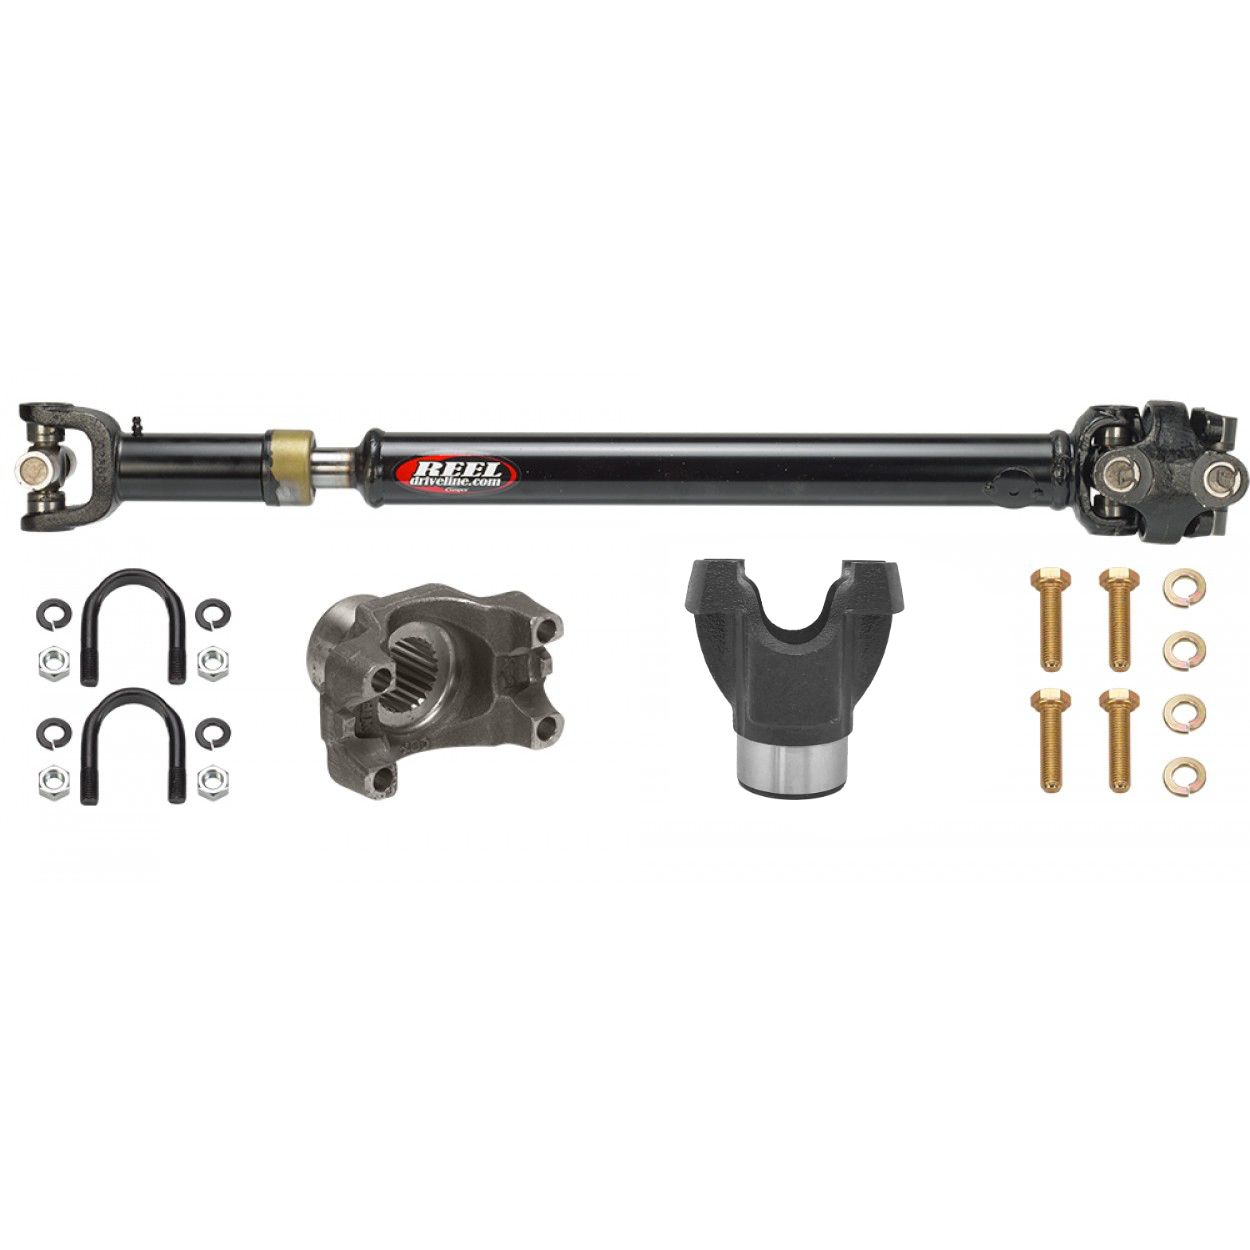 jeep-wrangler-jl-1310-heavy-duty-front-driveshaft-with-double-cardan-joint-2-or-4-door-man-1